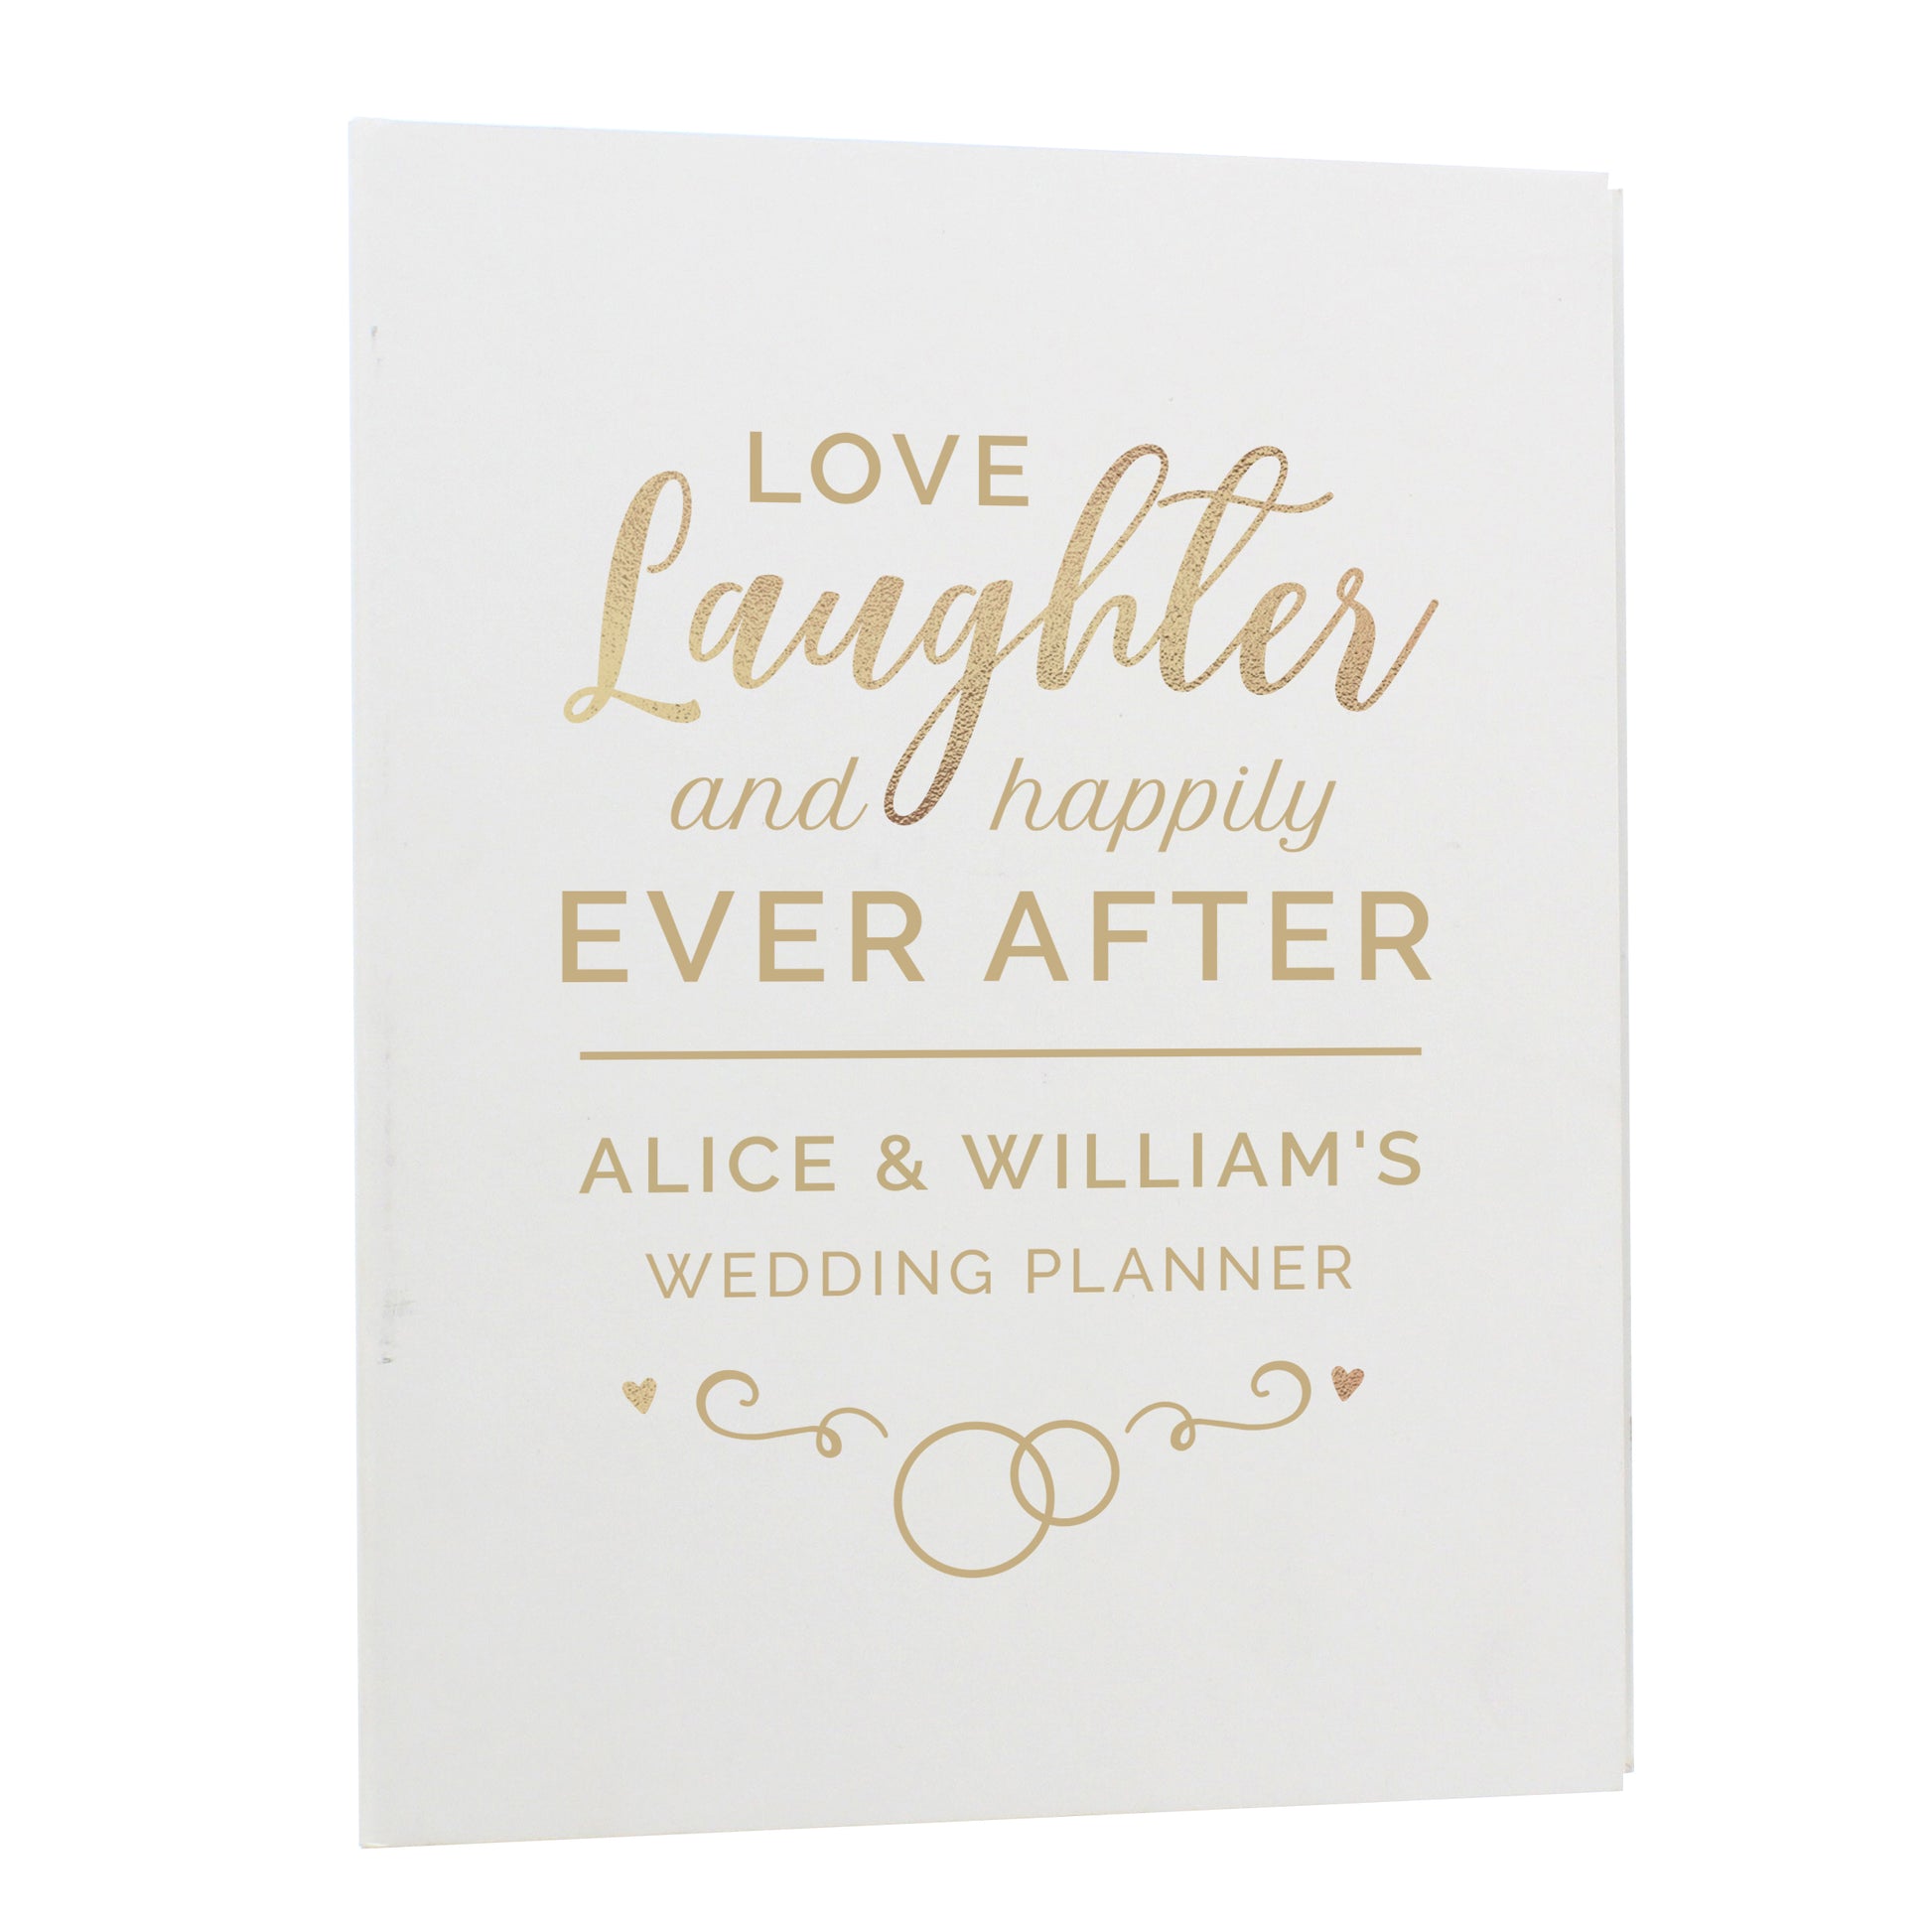 Love, Laughter and happily ever after wedding planner, personalised with the couple's first names. A ring bound planner with lots of useful content.